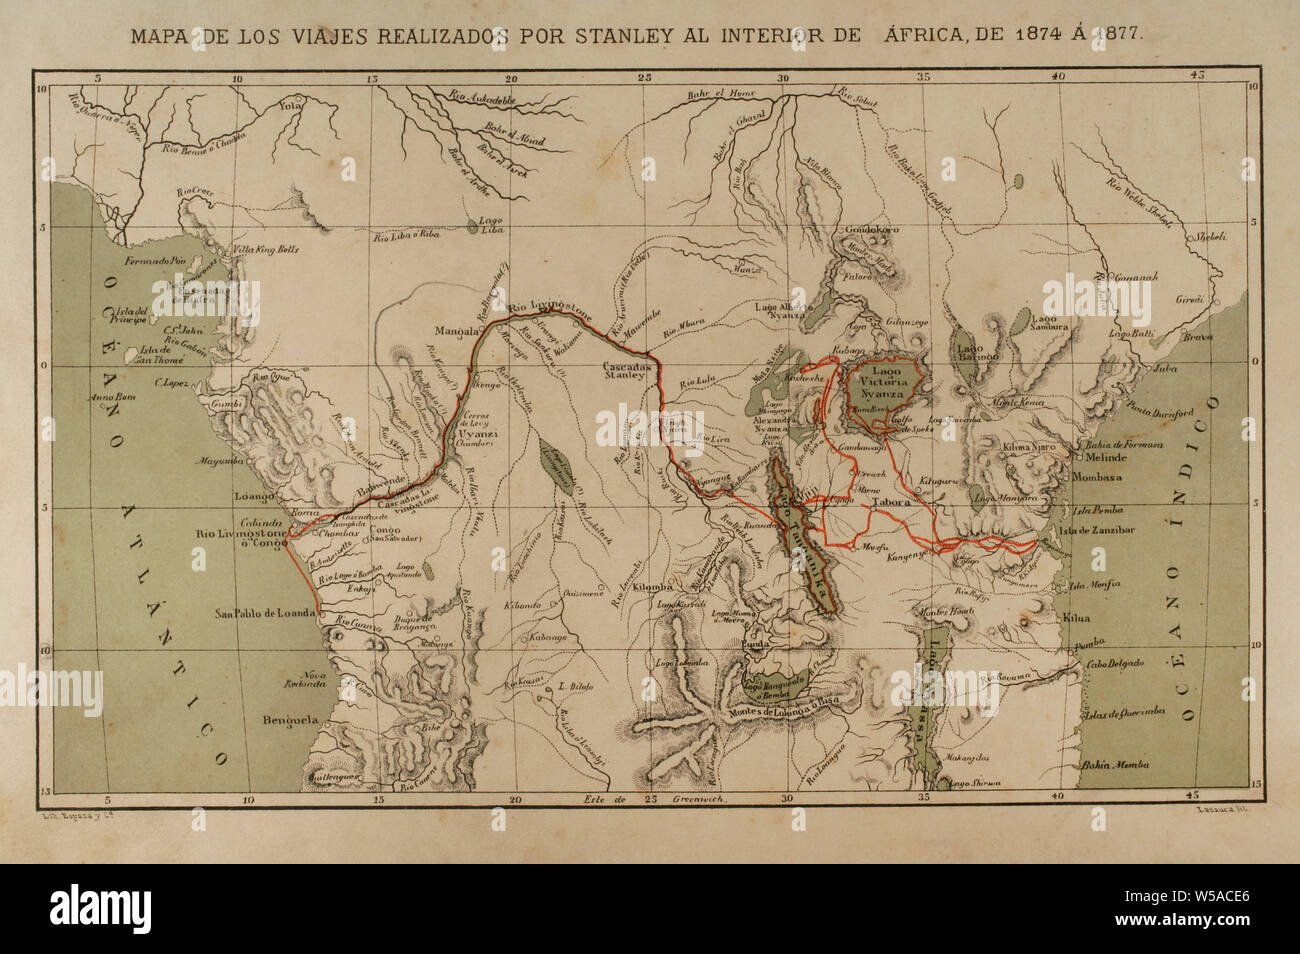 Exploration and mapping of the Congo River (1874-1877). Henry Morton Stanley. He traveled central Africa exploring Lake Victoria and Lake Tanganyka navigating the Congo River. Africa inexplorada, el Continente Misterioso by Henry Morton Stanley, c. 1887. Stock Photo